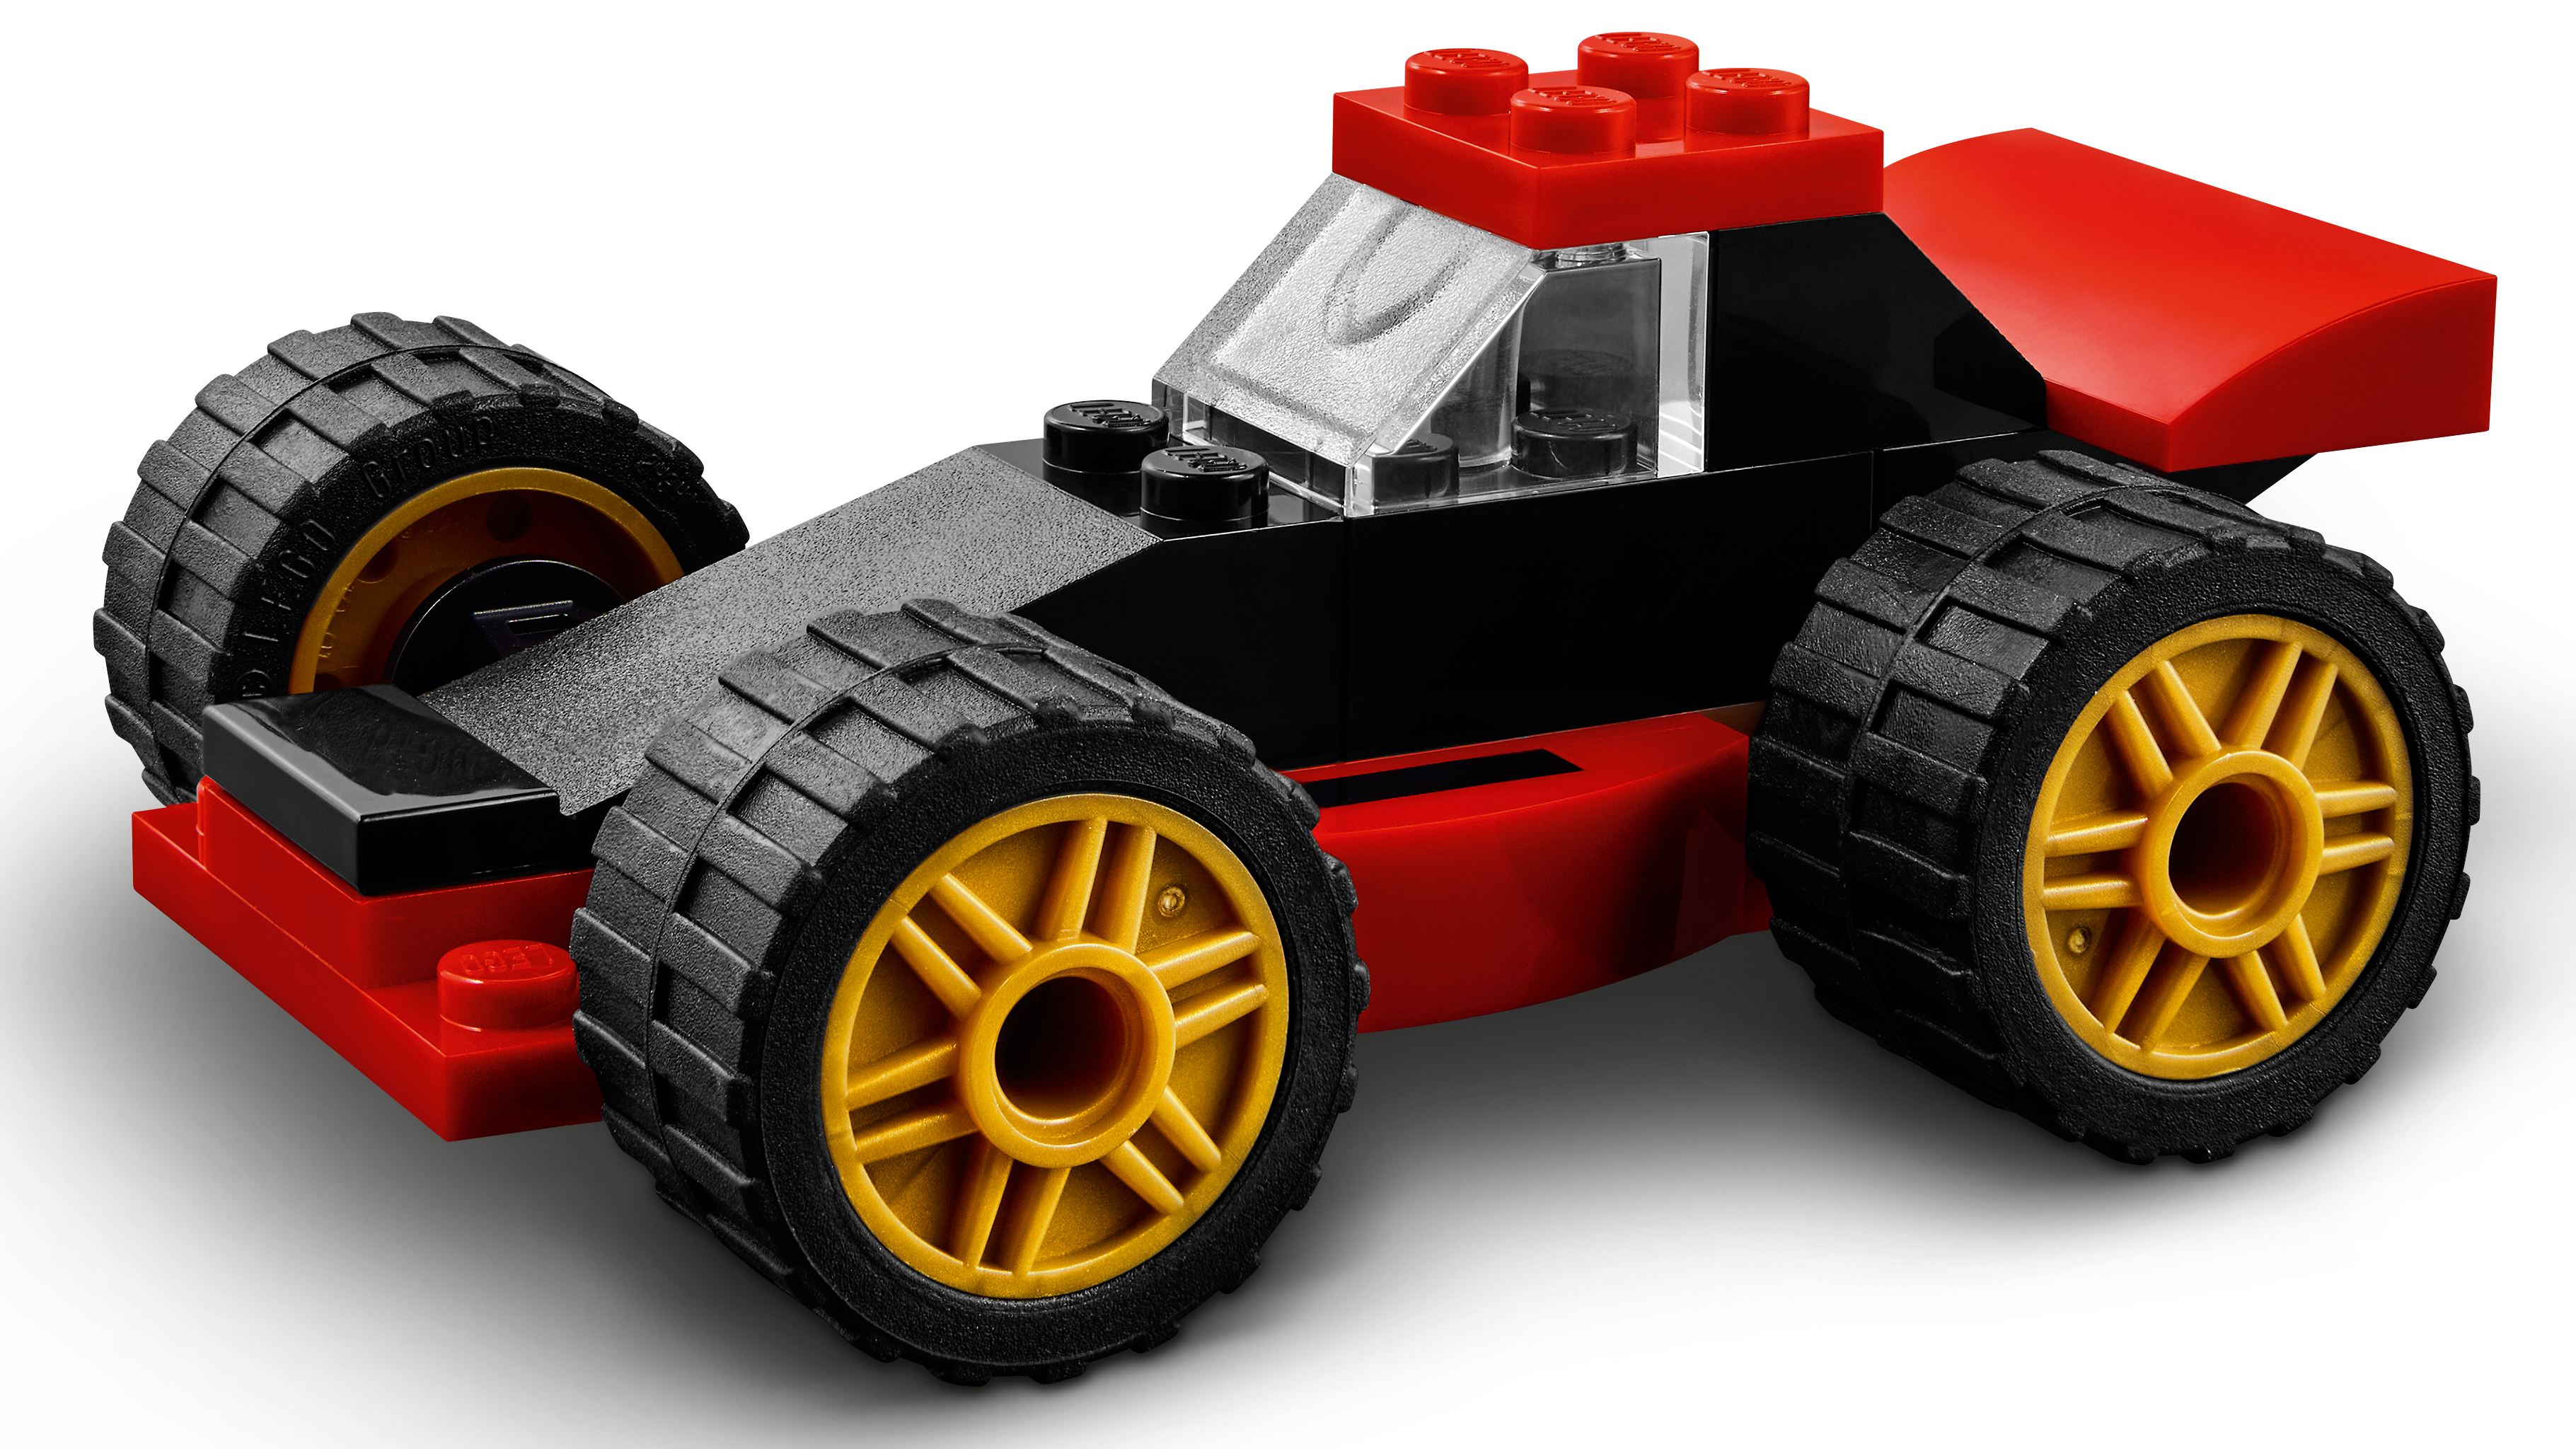 Bricks and Wheels 11014 Classic | Buy online at the Official LEGO® Shop US